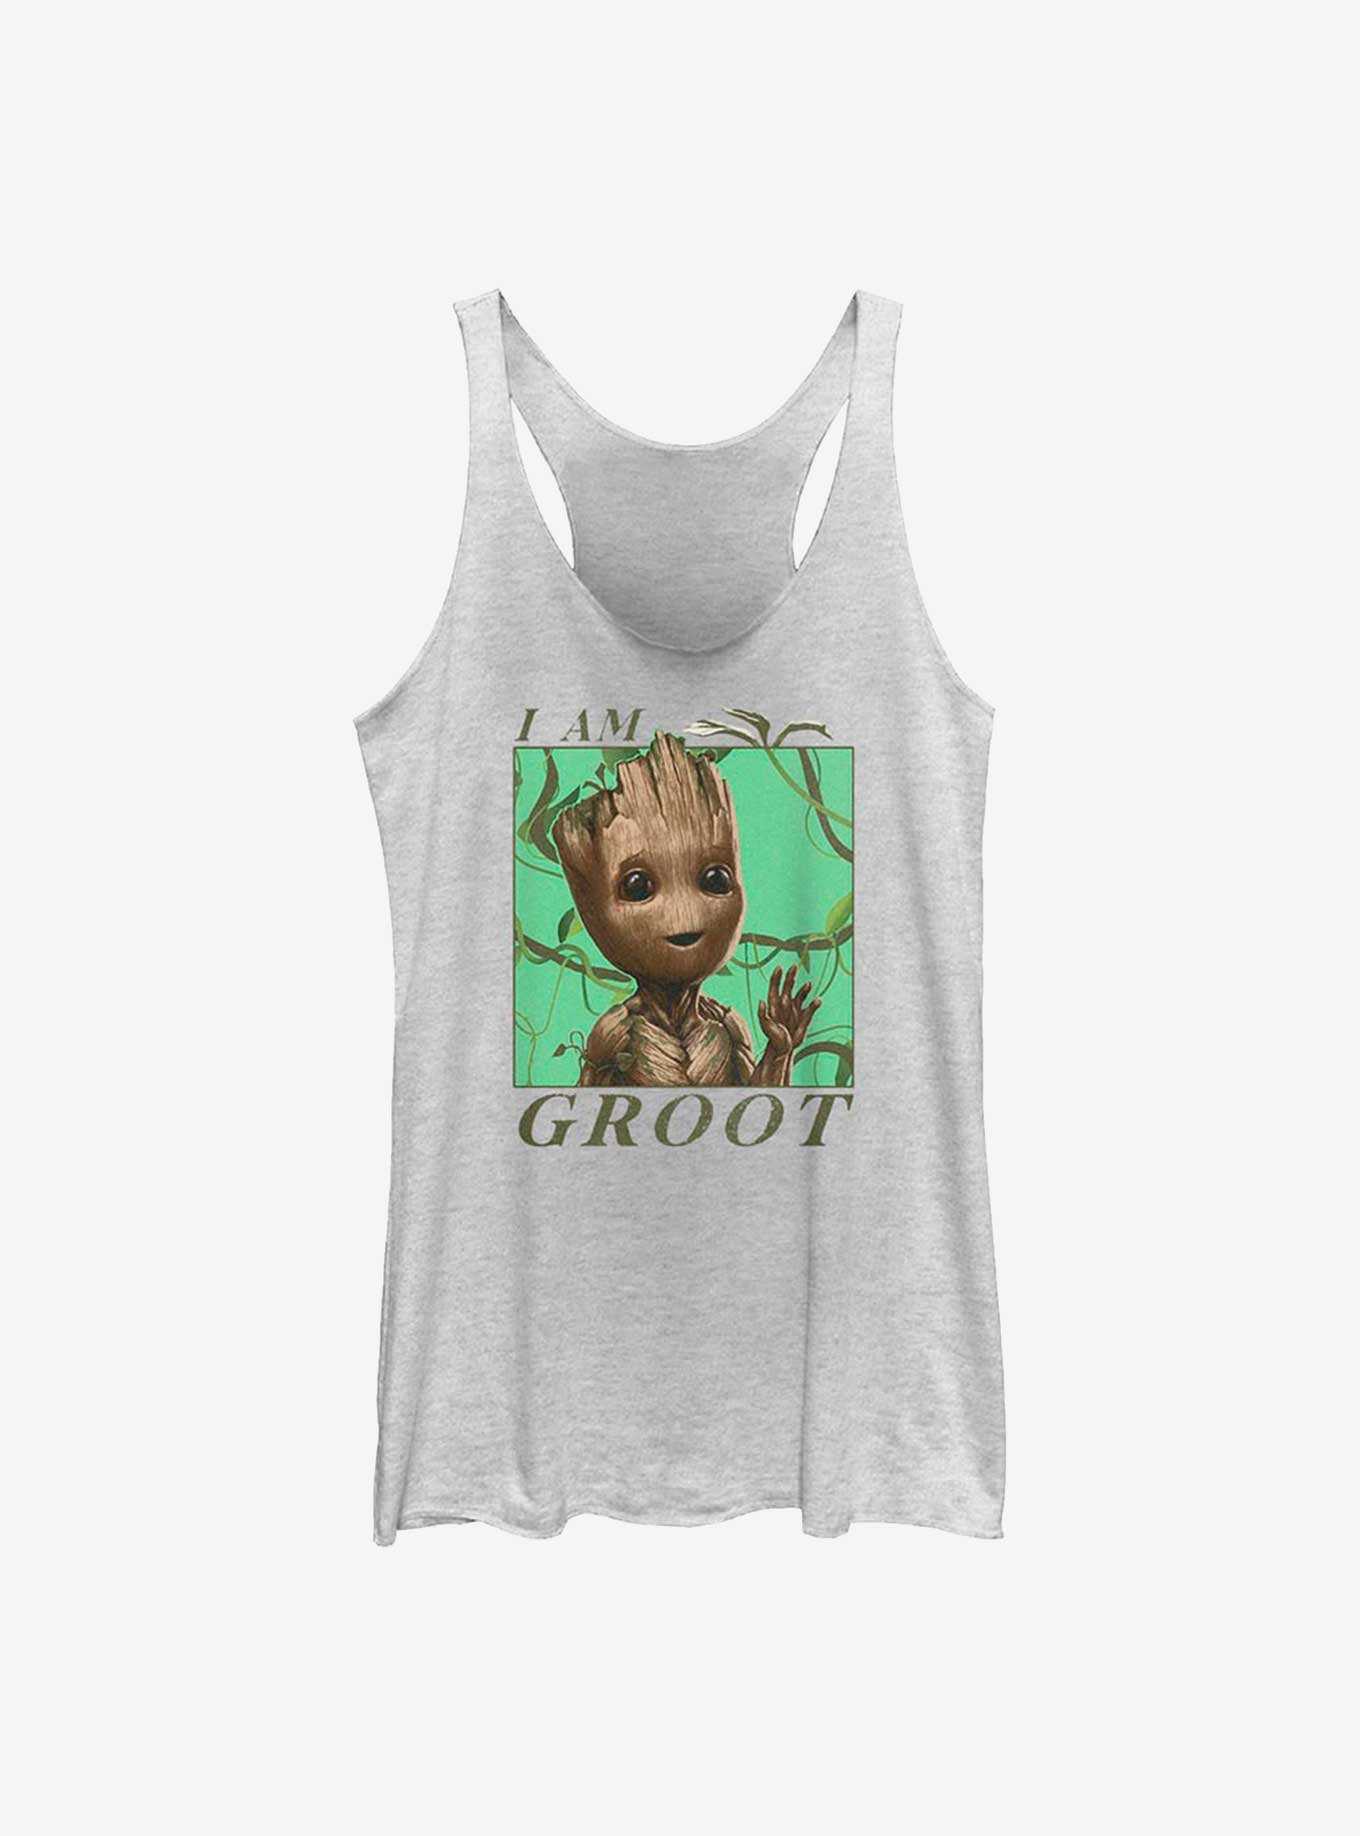 Marvel Guardians of the Galaxy Jungle Vibes Girls Tank, , hi-res